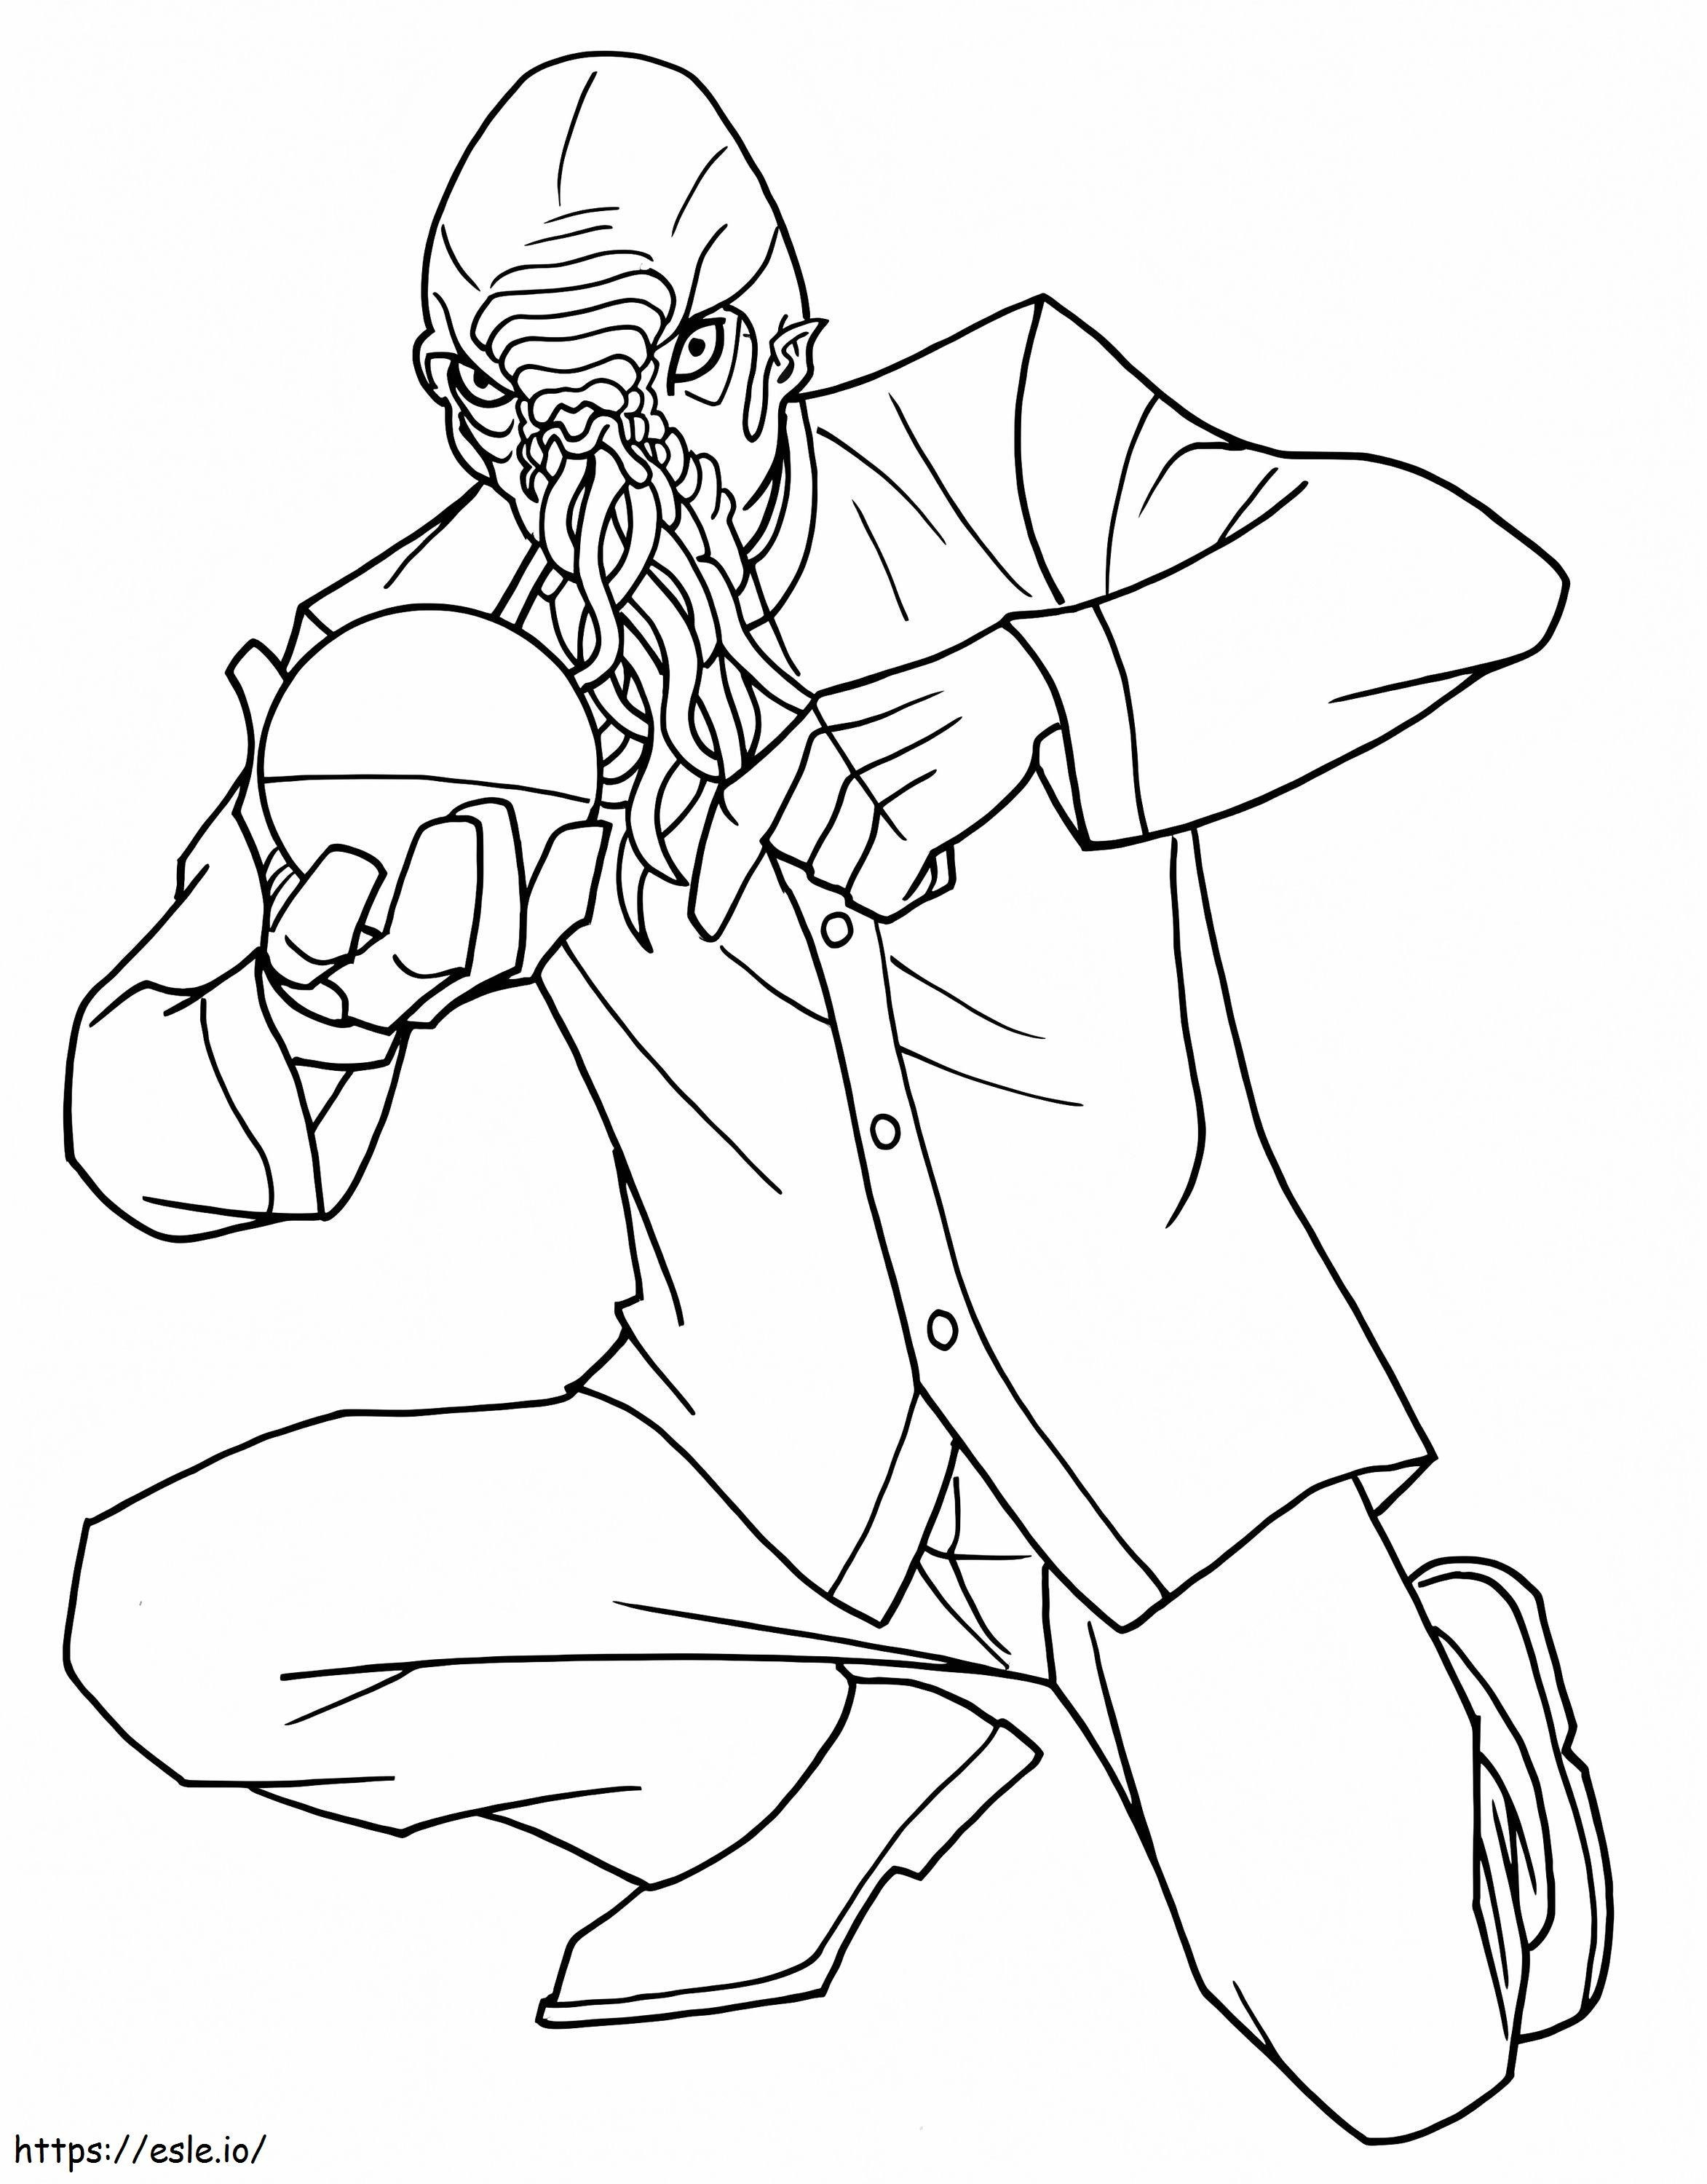 Ood Alien coloring page